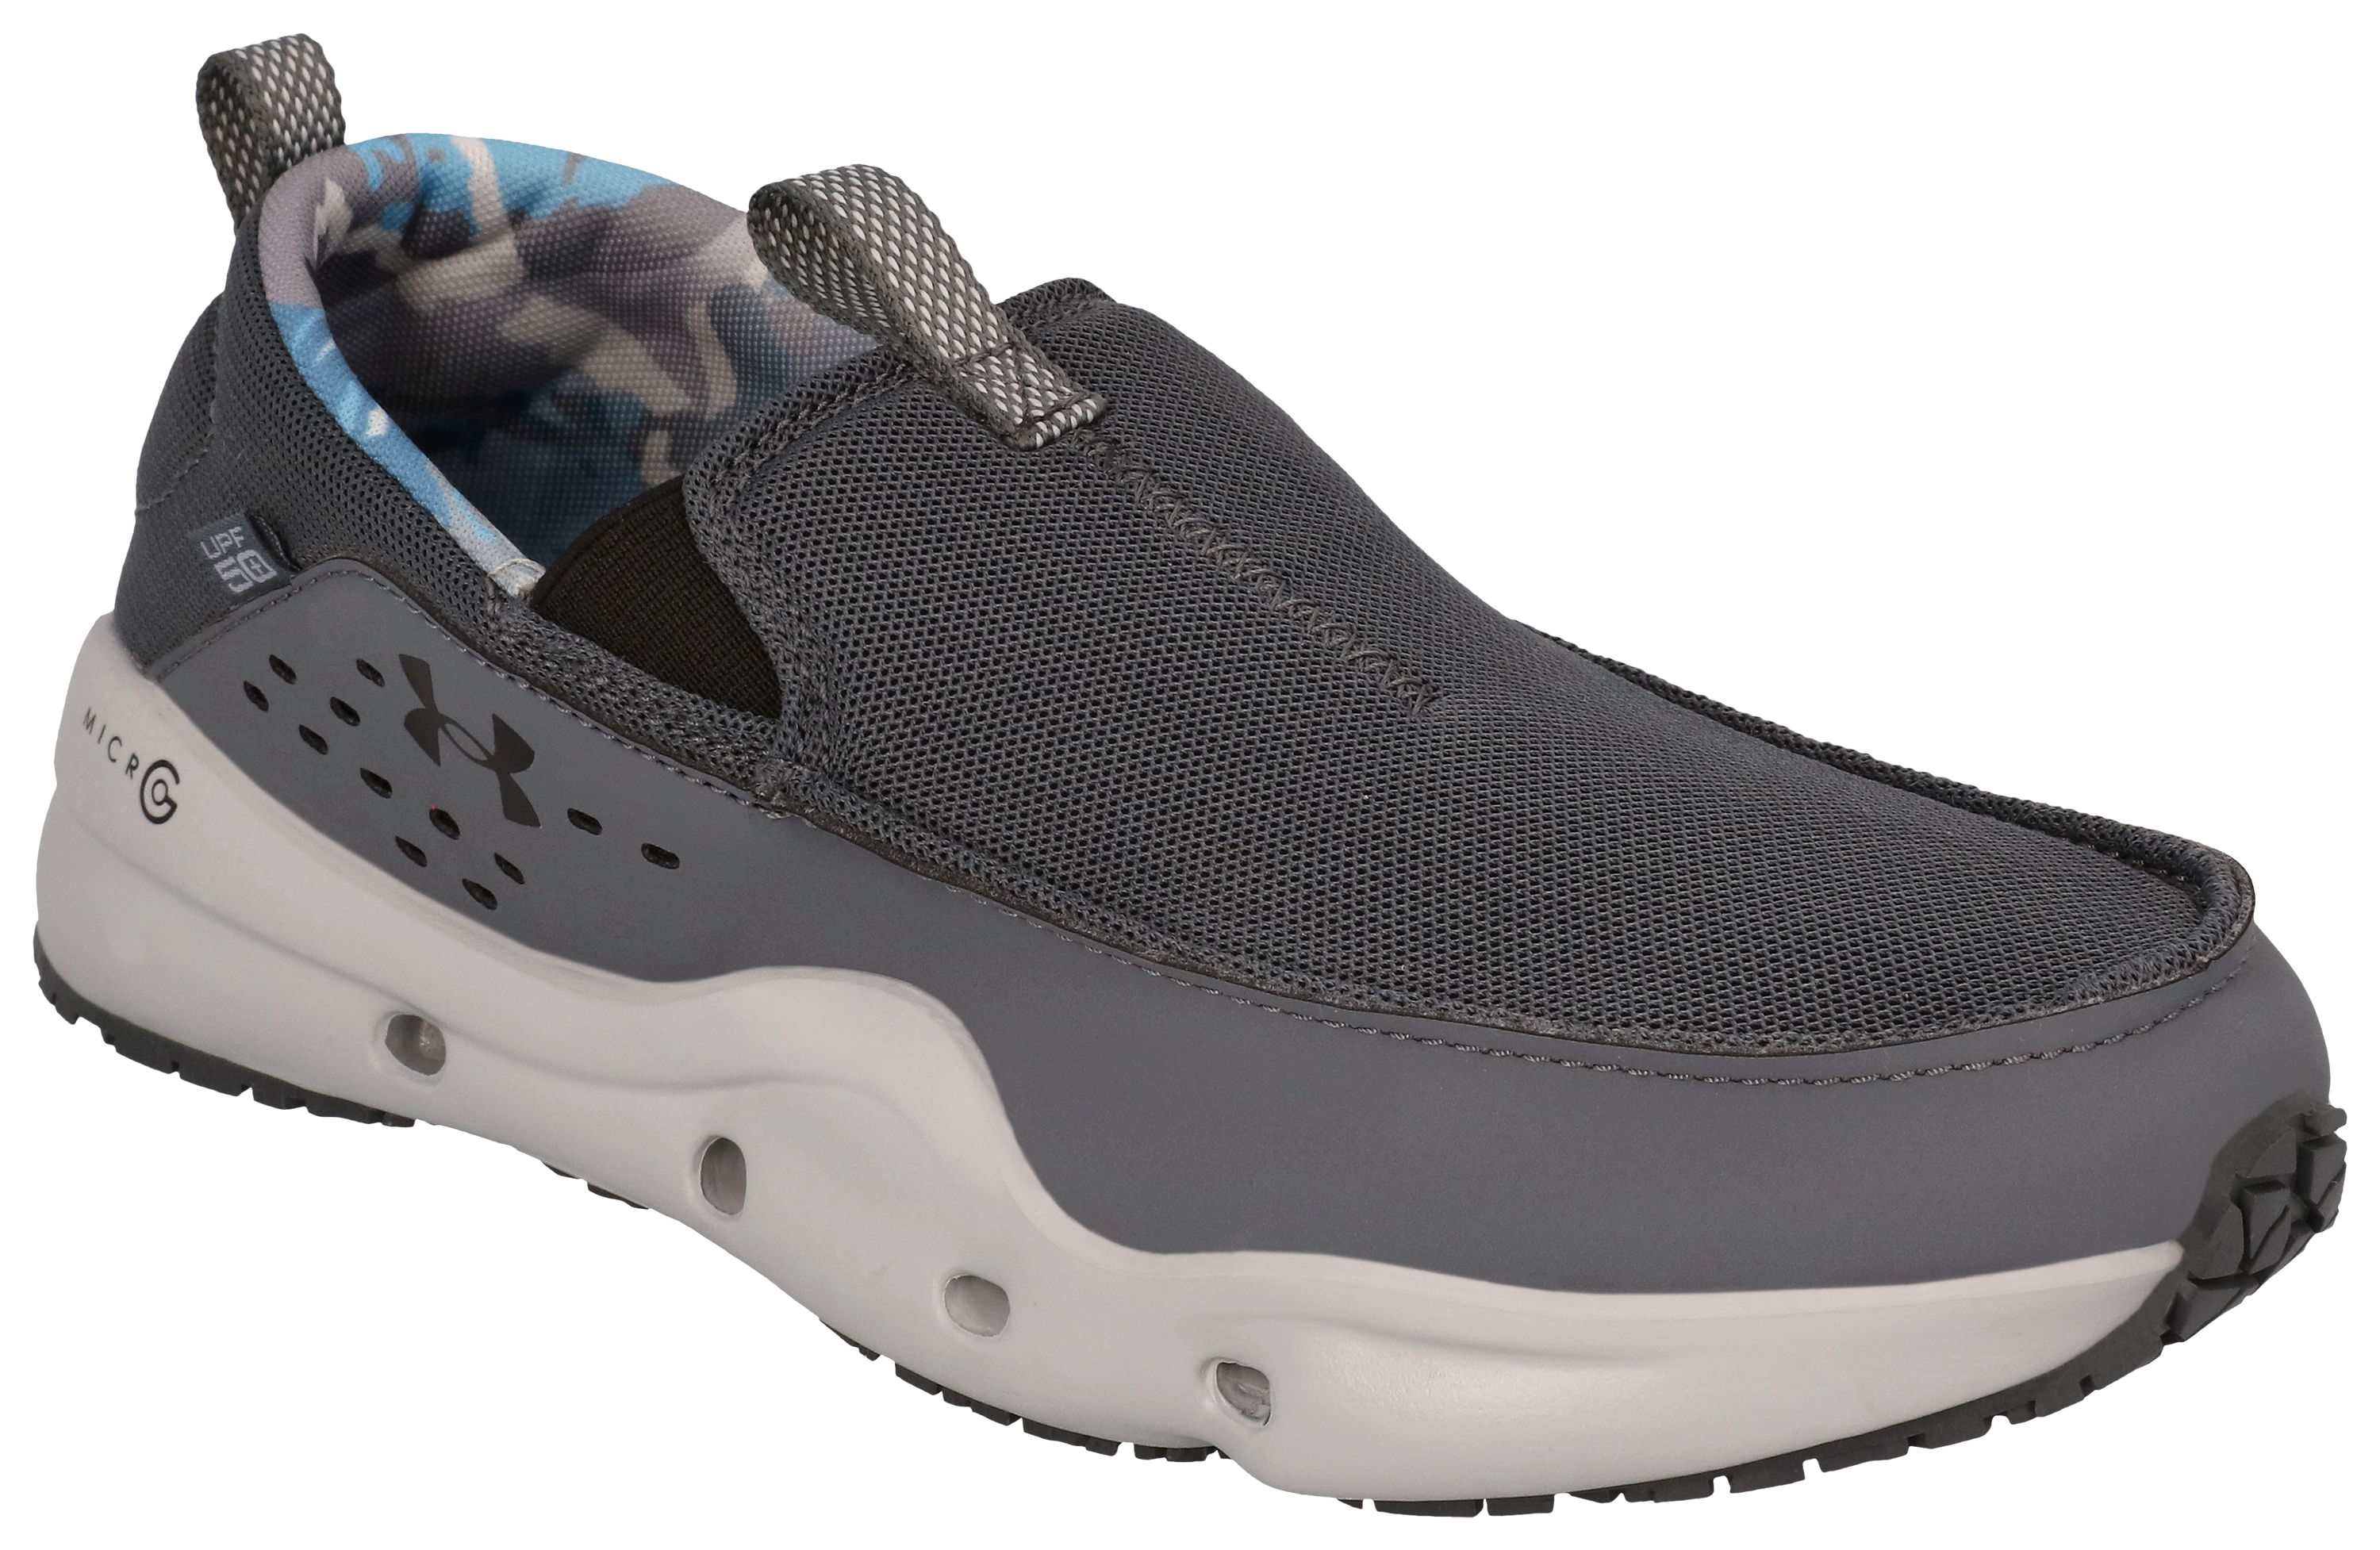 Under Armour Micro G Kilchis Slip-On Boat Shoes for Men